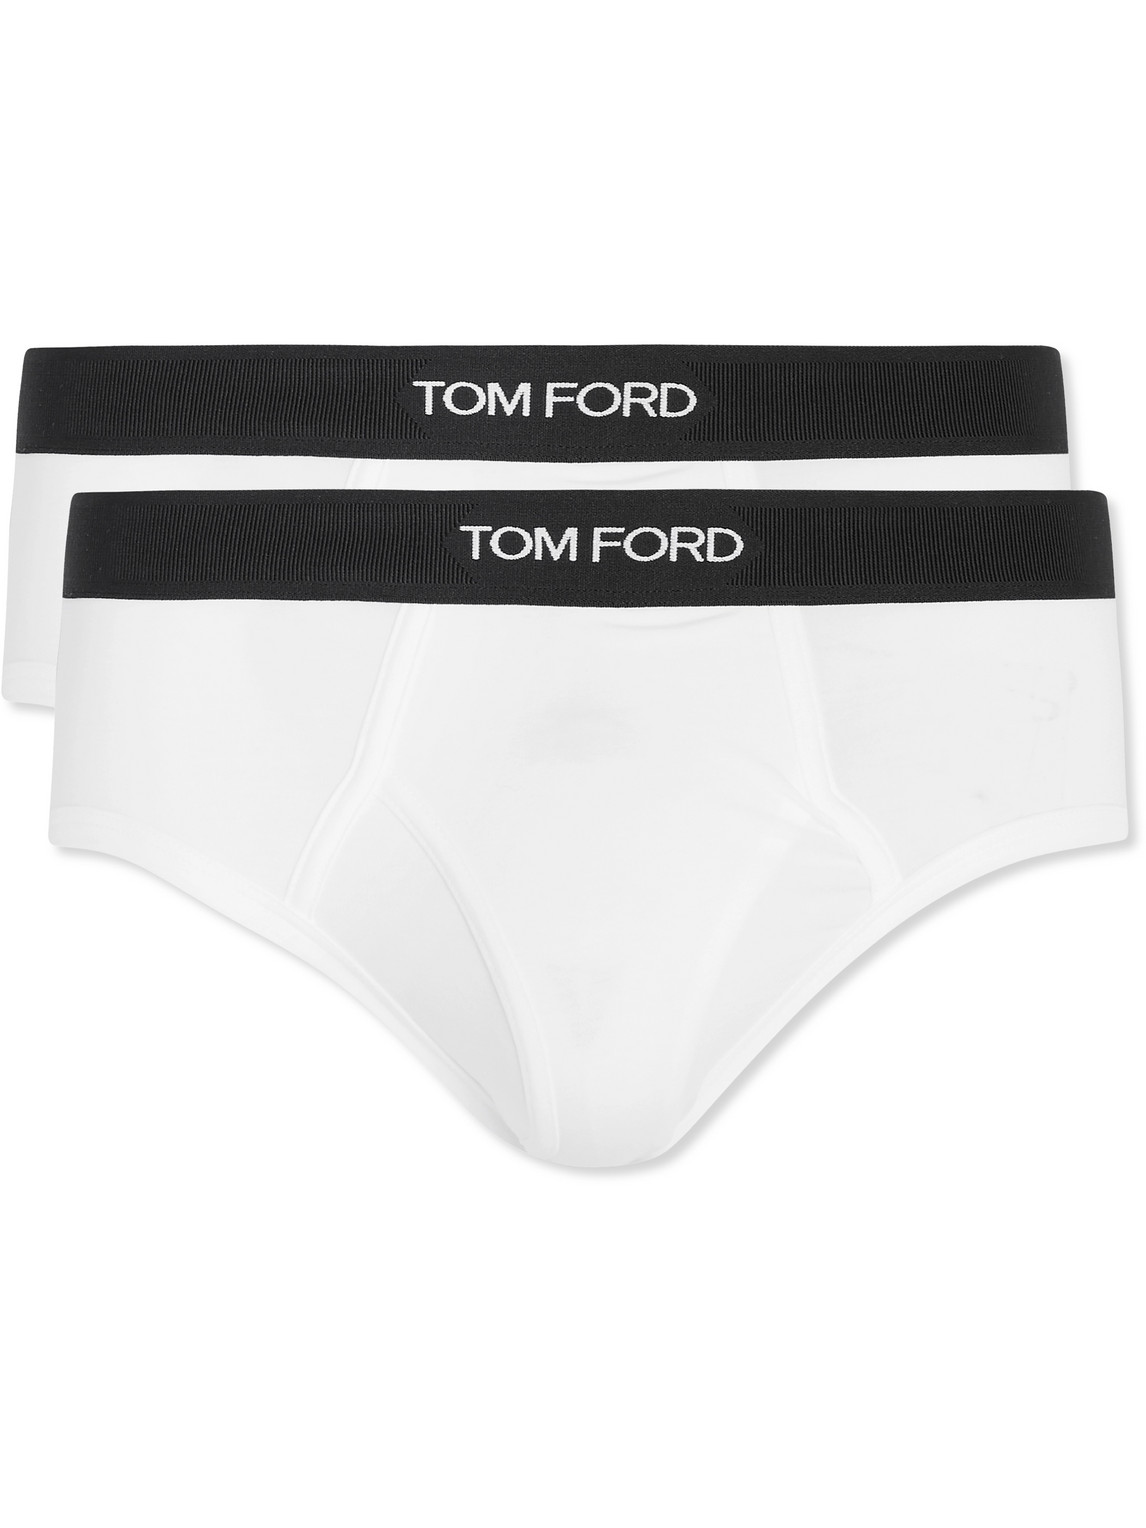 TOM FORD - Two-Pack Stretch Cotton and Modal-Blend Briefs - Men - White - L von TOM FORD